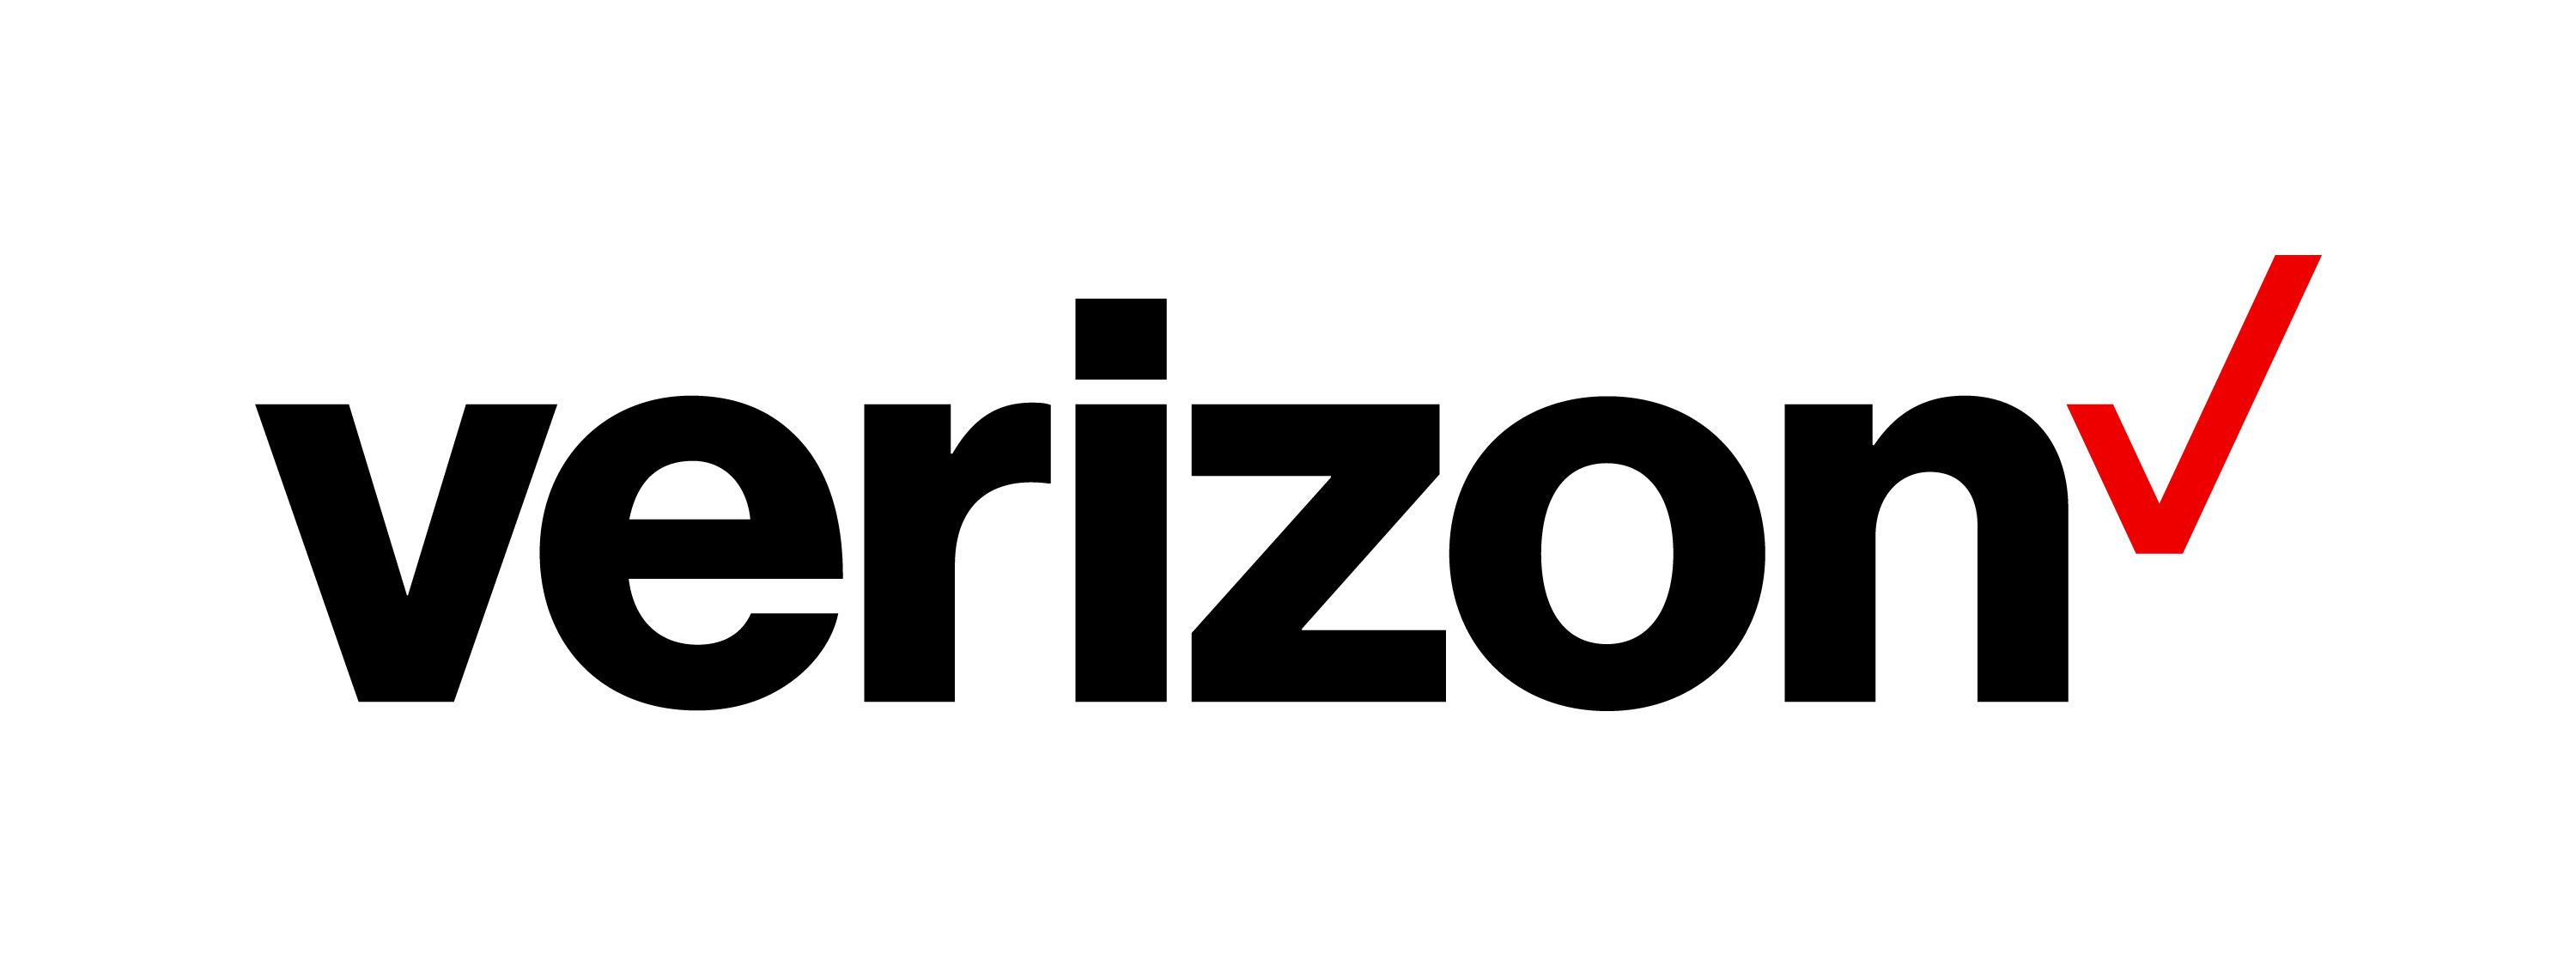 Verizon written in black with a red check mark at the end.